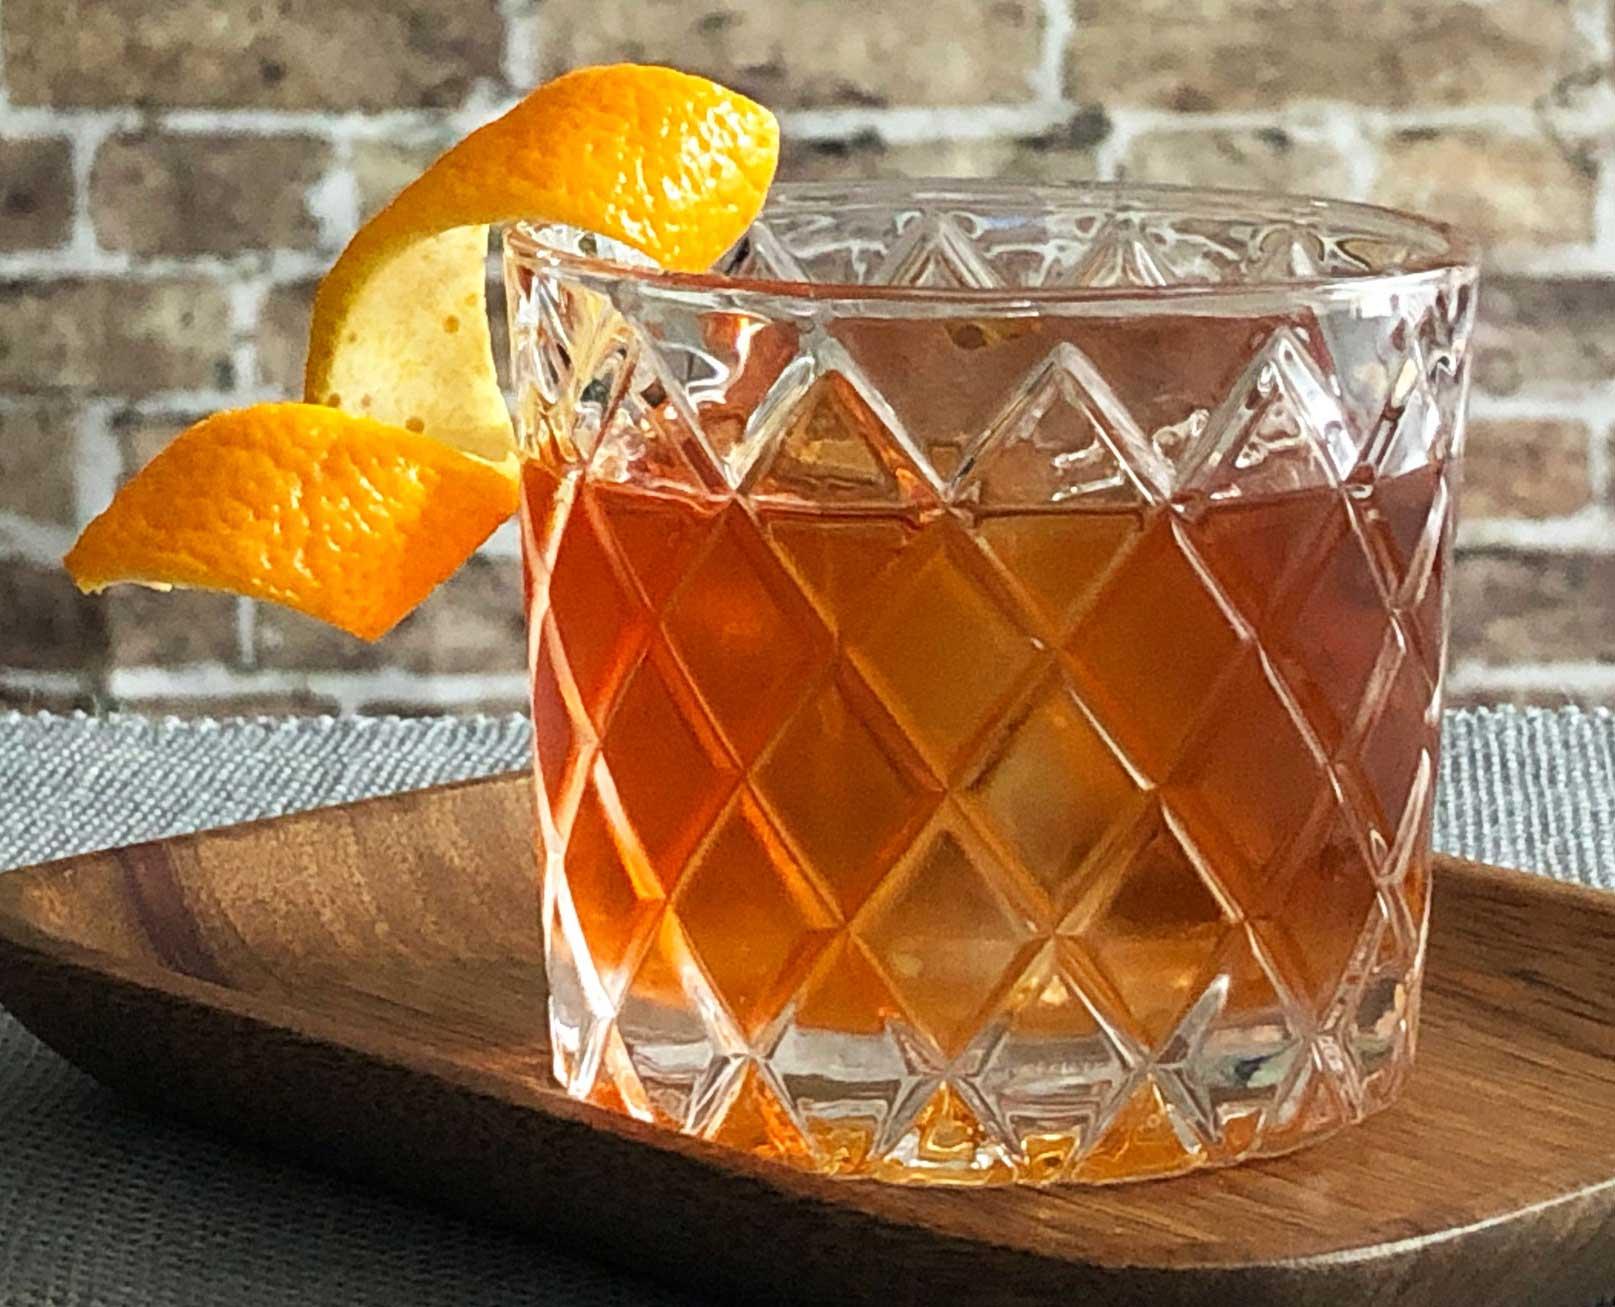 An example of the Rum Old Fashioned, the mixed drink (drink) featuring The Scarlet Ibis Trinidad Rum, Smith & Cross Traditional Jamaica Rum, raw sugar syrup, Angostura bitters, and orange twist; photo by Lee Edwards